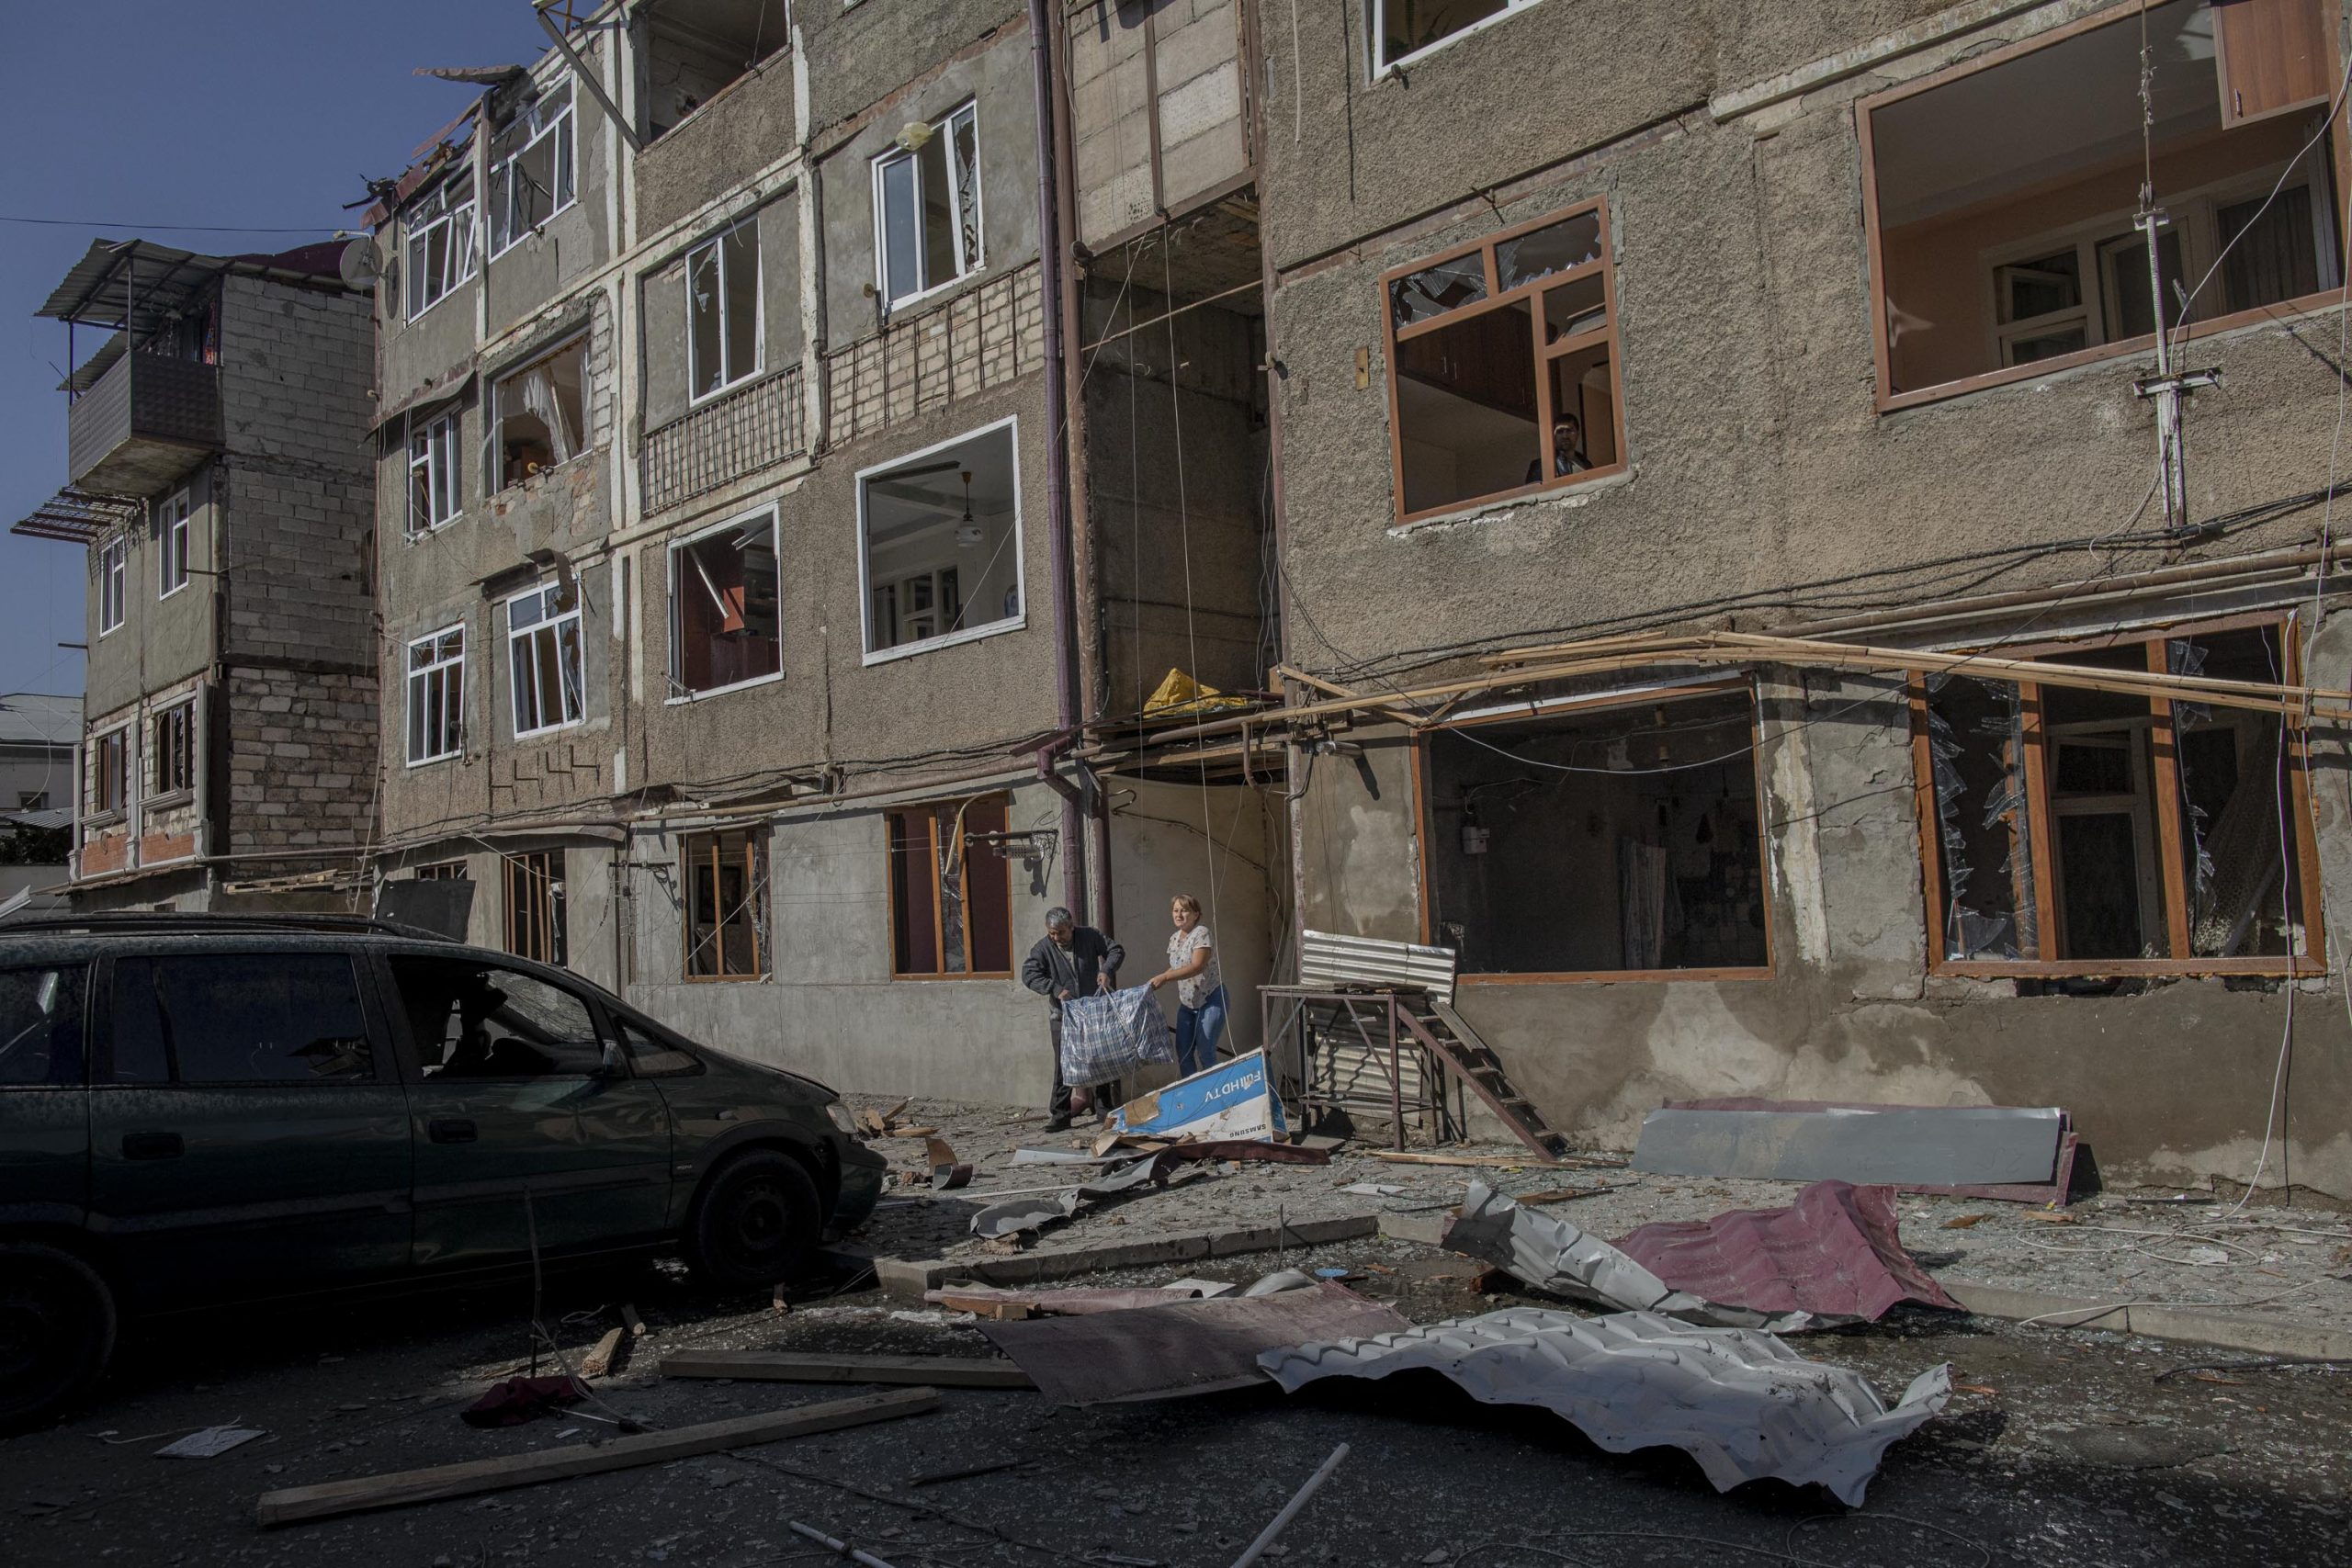 People carry their belongings out of a building damaged by a missile attack, in Stepanakert, Nagorno-Karabakh, on October 3, 2020. The building was damaged on the previous day, October 2.